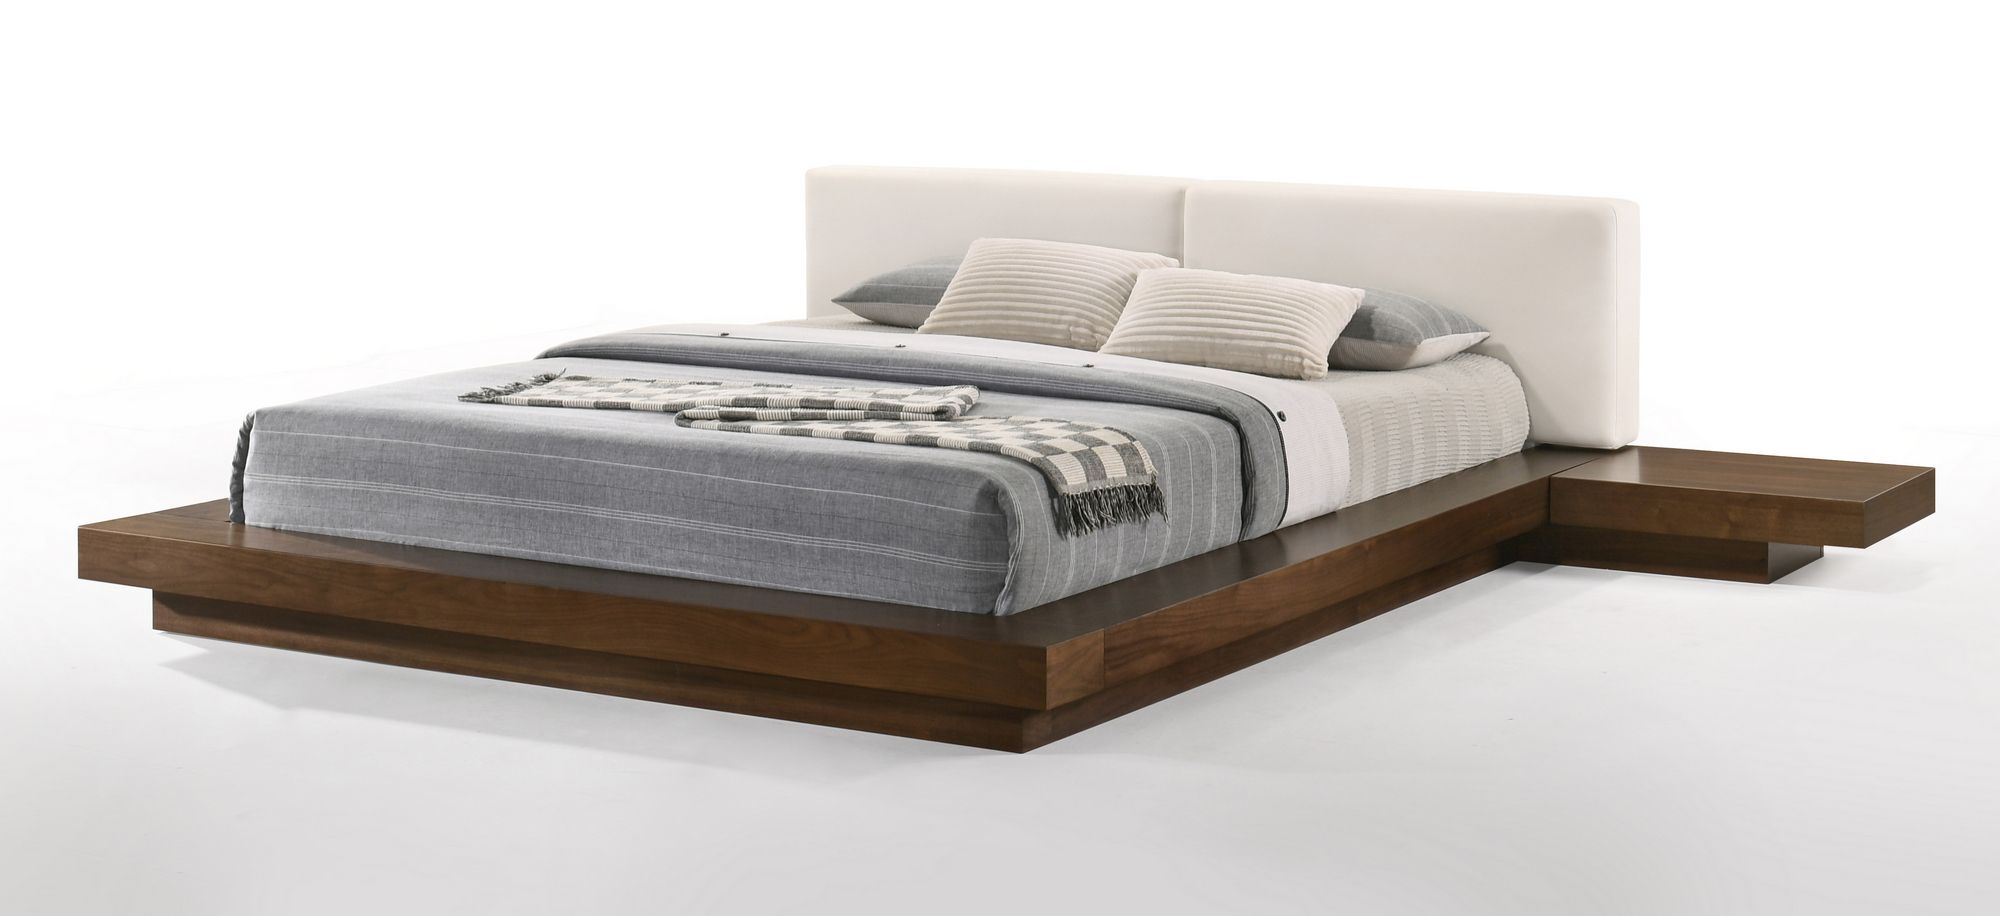 Japanese Style Platform Bed Queen Size